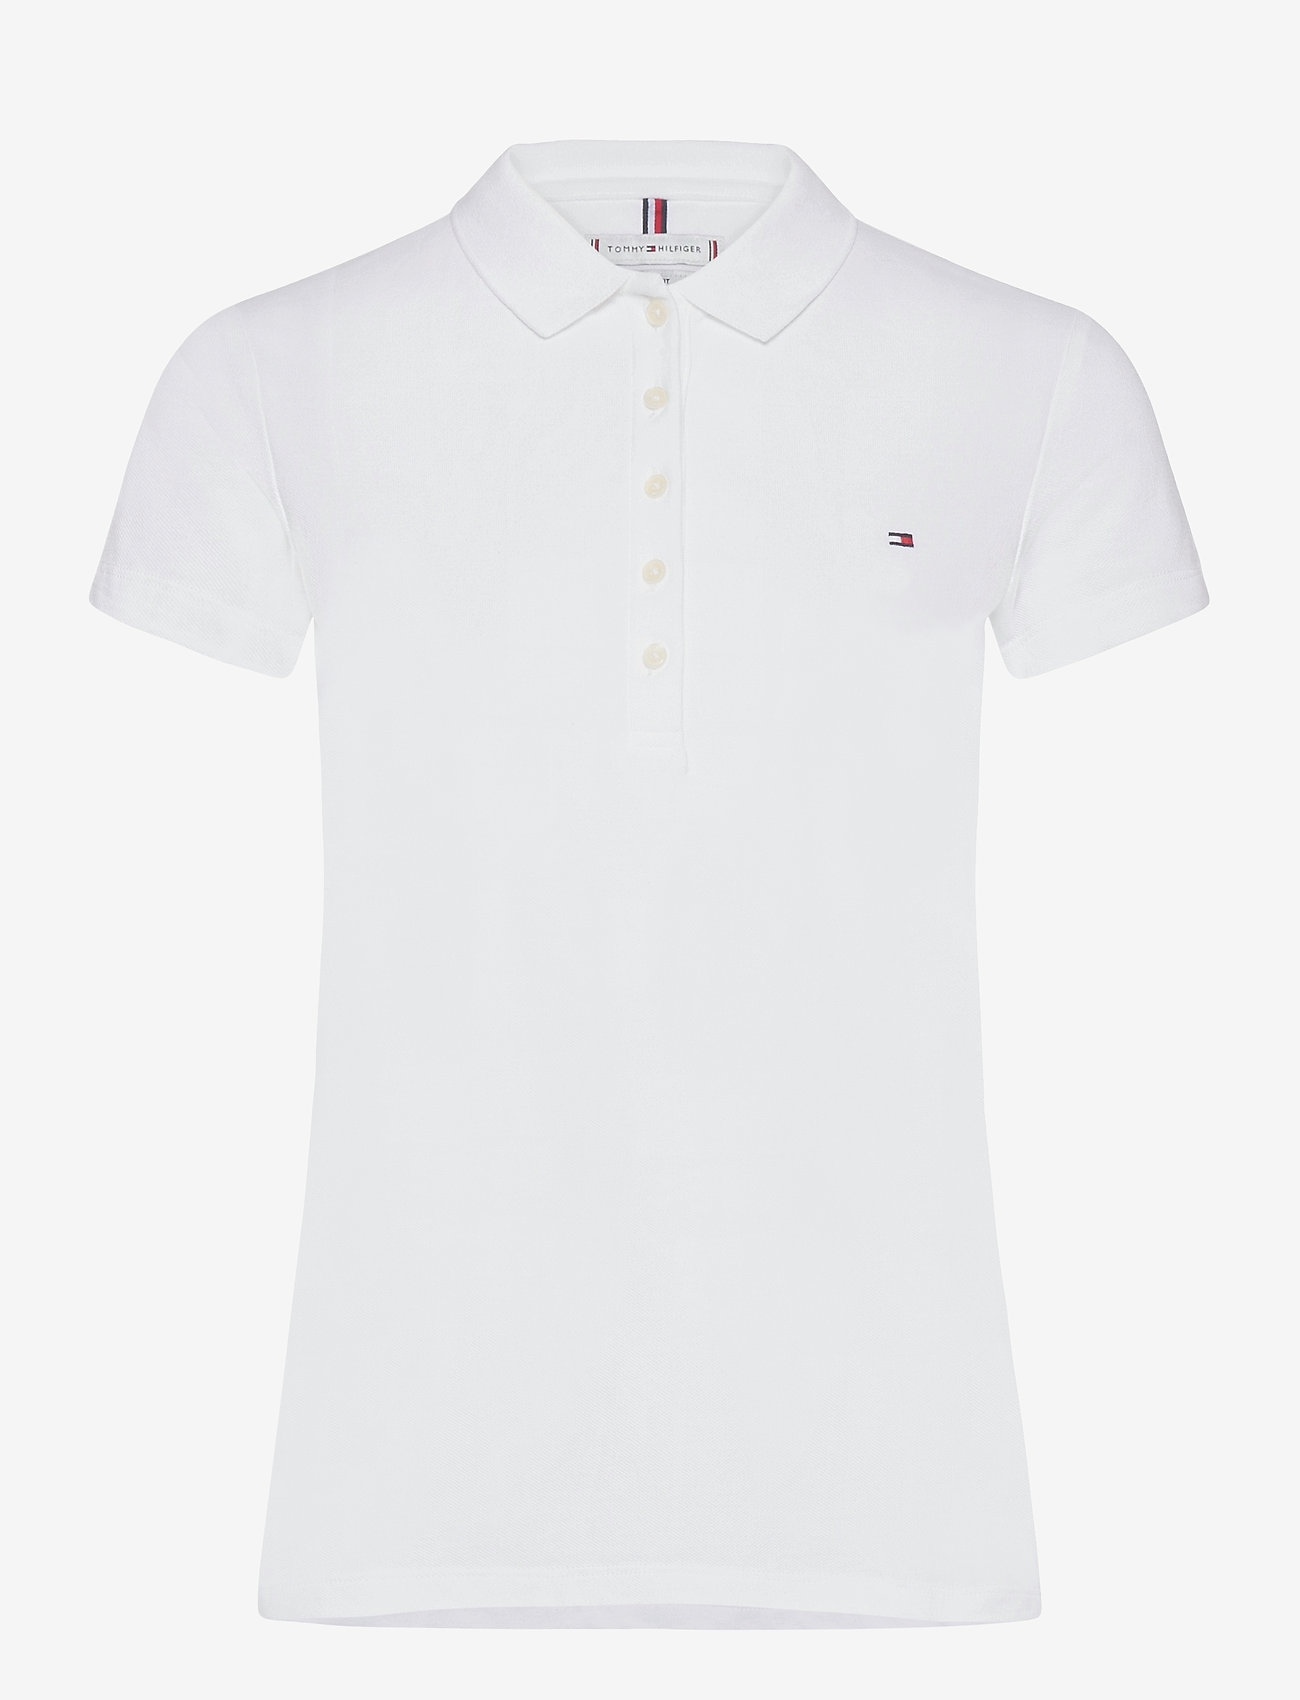 Tommy Hilfiger - HERITAGE SHORT SLEEVE SLIM POLO - polo's - classic white - 0